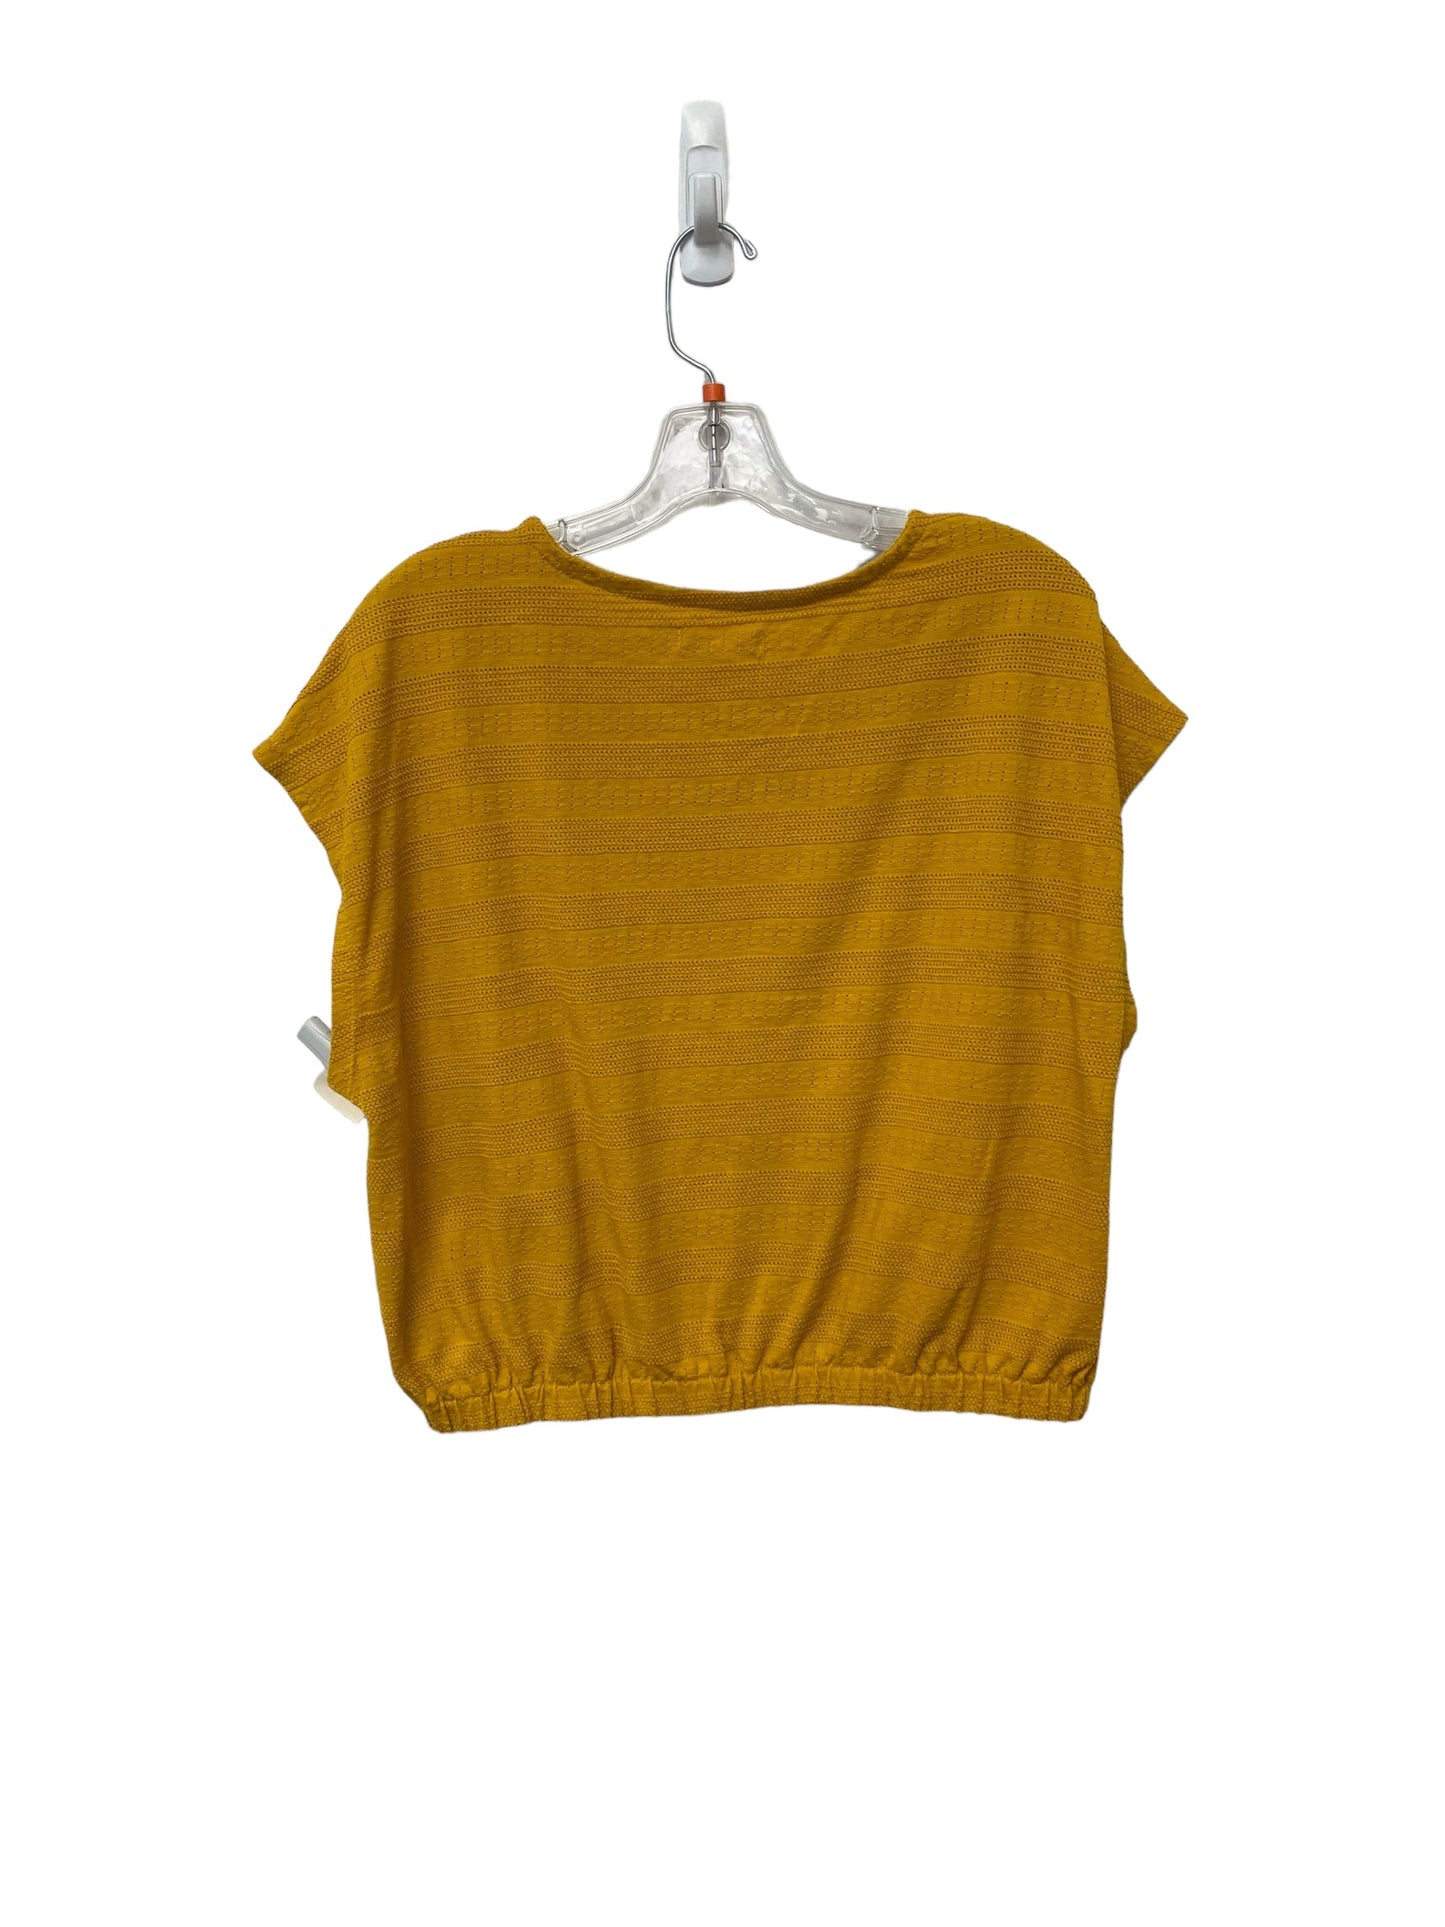 Yellow Top Short Sleeve Madewell, Size L